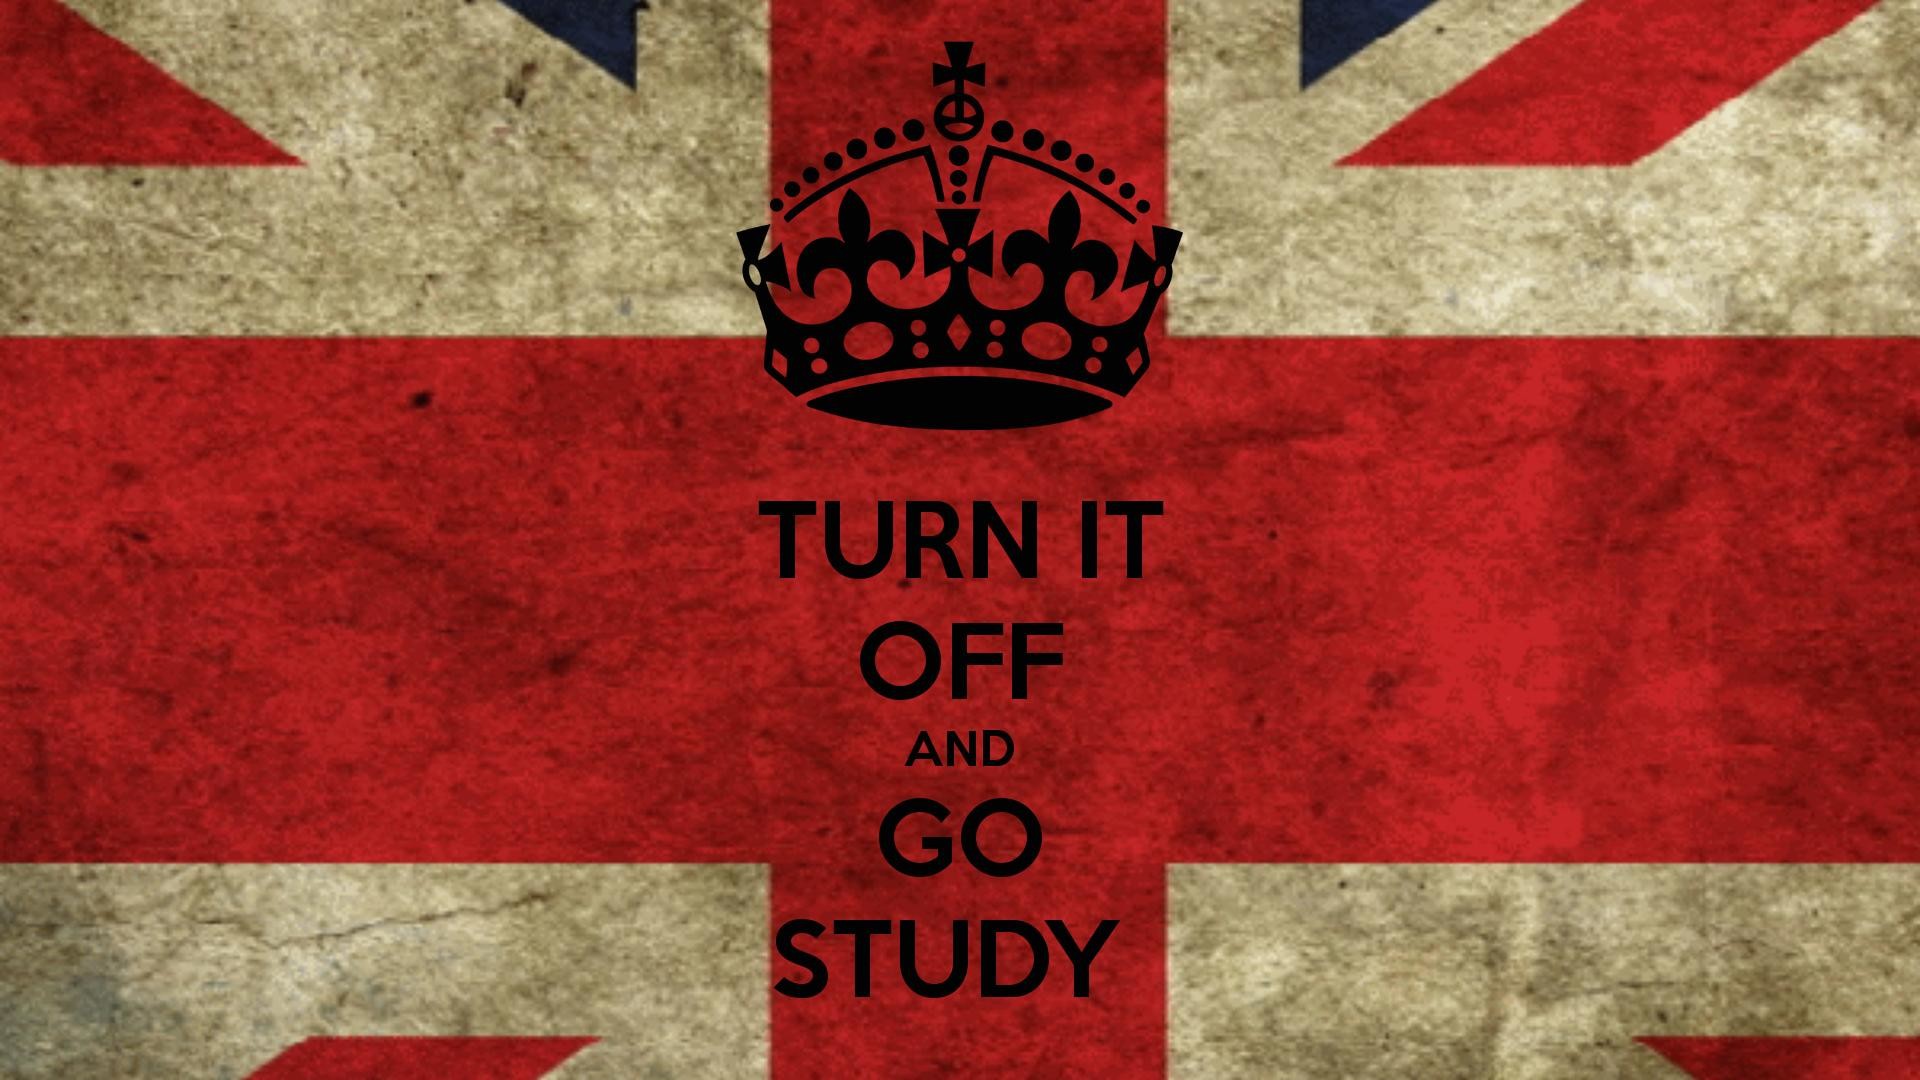 1920x1080 TURN IT OFF AND GO STUDY - KEEP CALM AND CARRY ON Image Generator